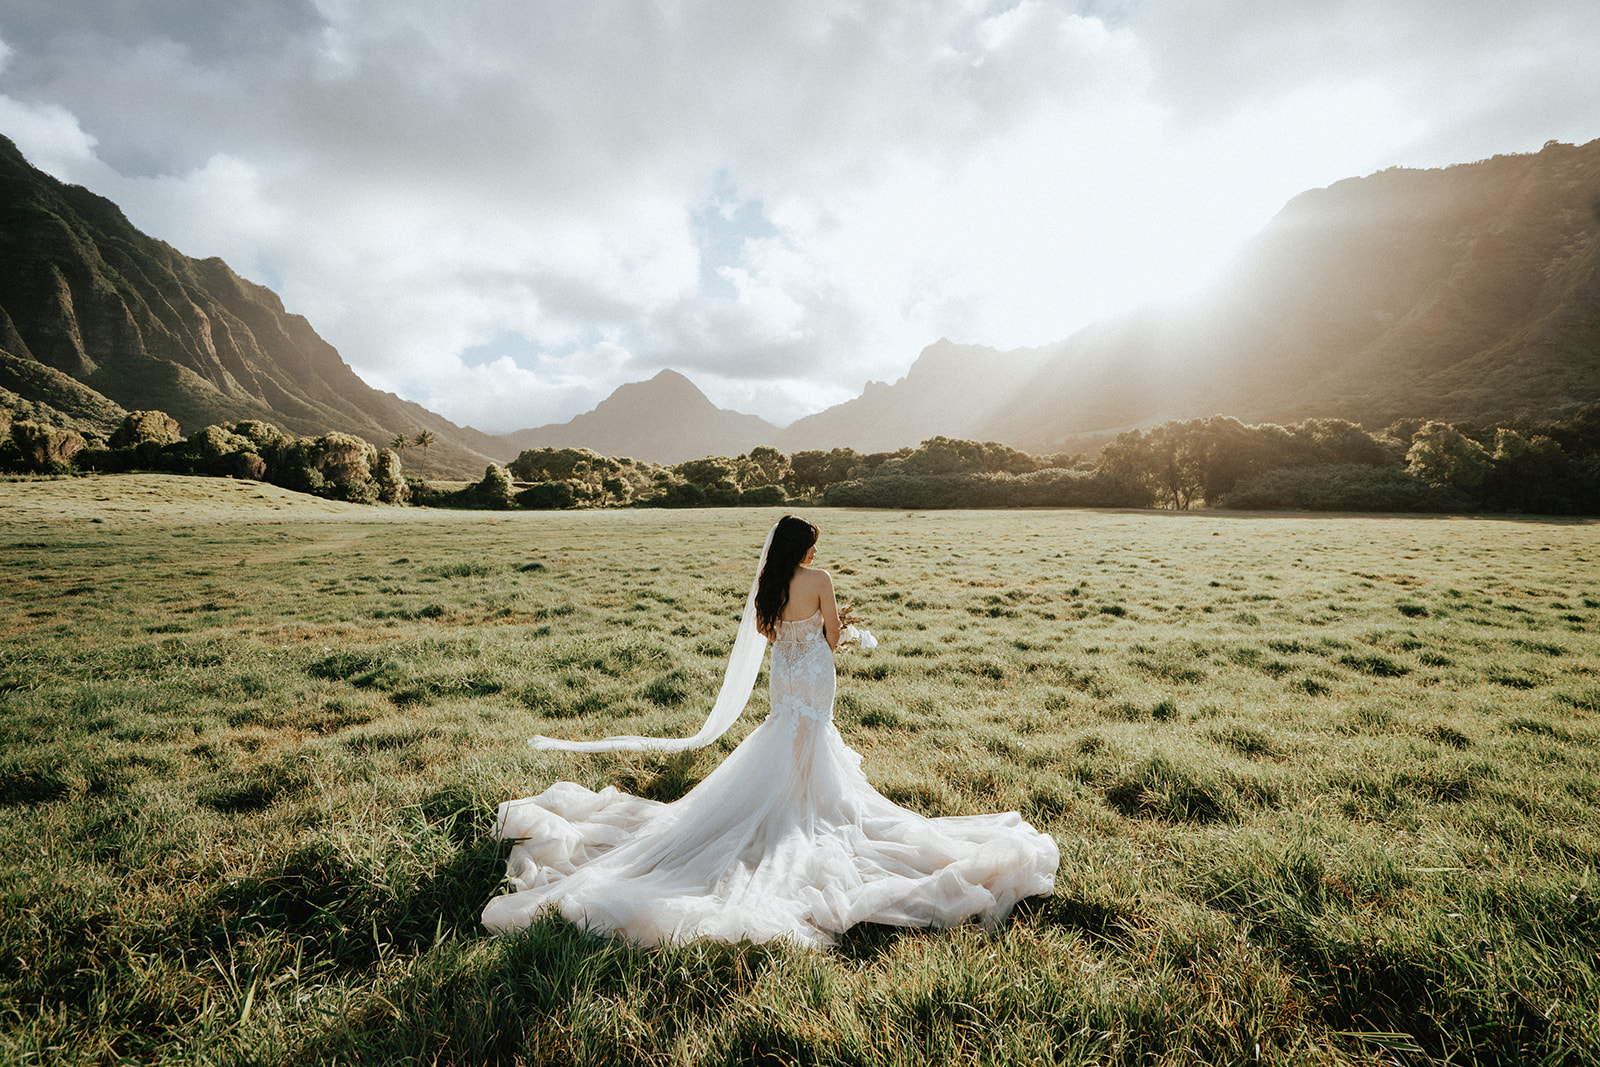 A Bride on a sunny field after the wedding in Kualoa Ranch